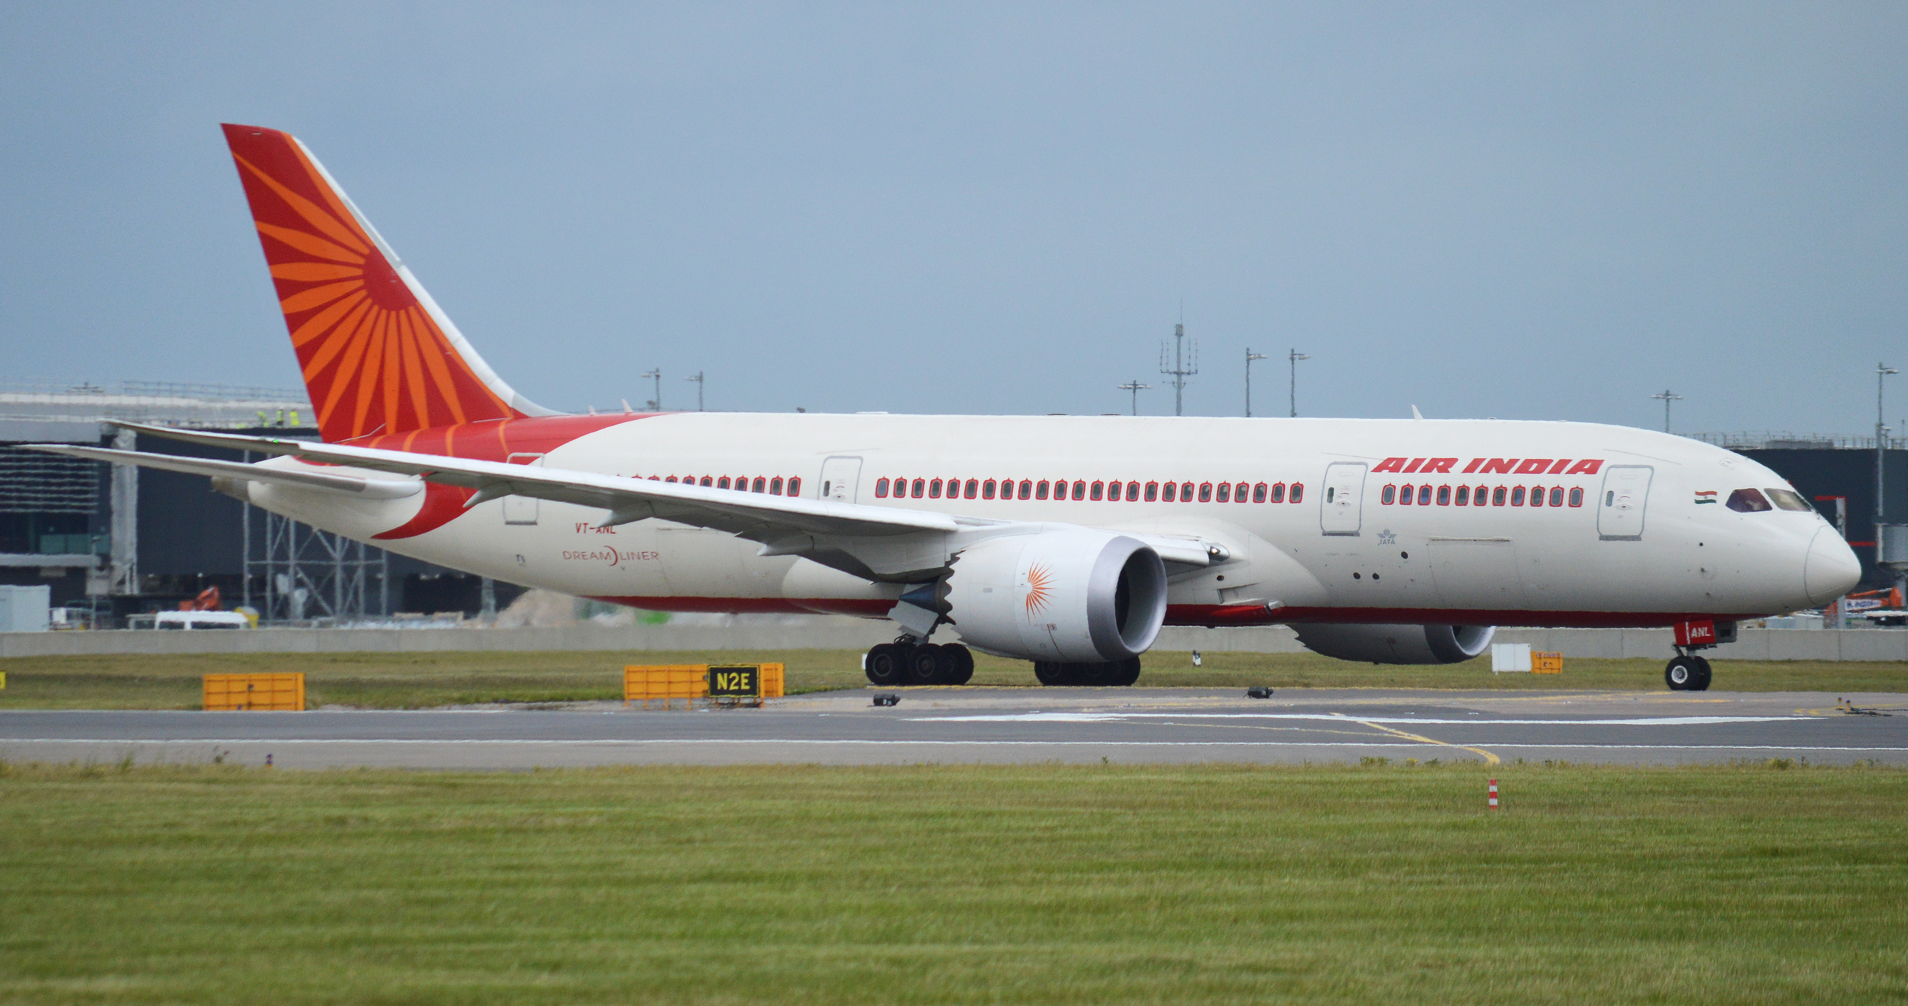 Air India forgets to schedule pilots, left passengers stranded for 12hrs